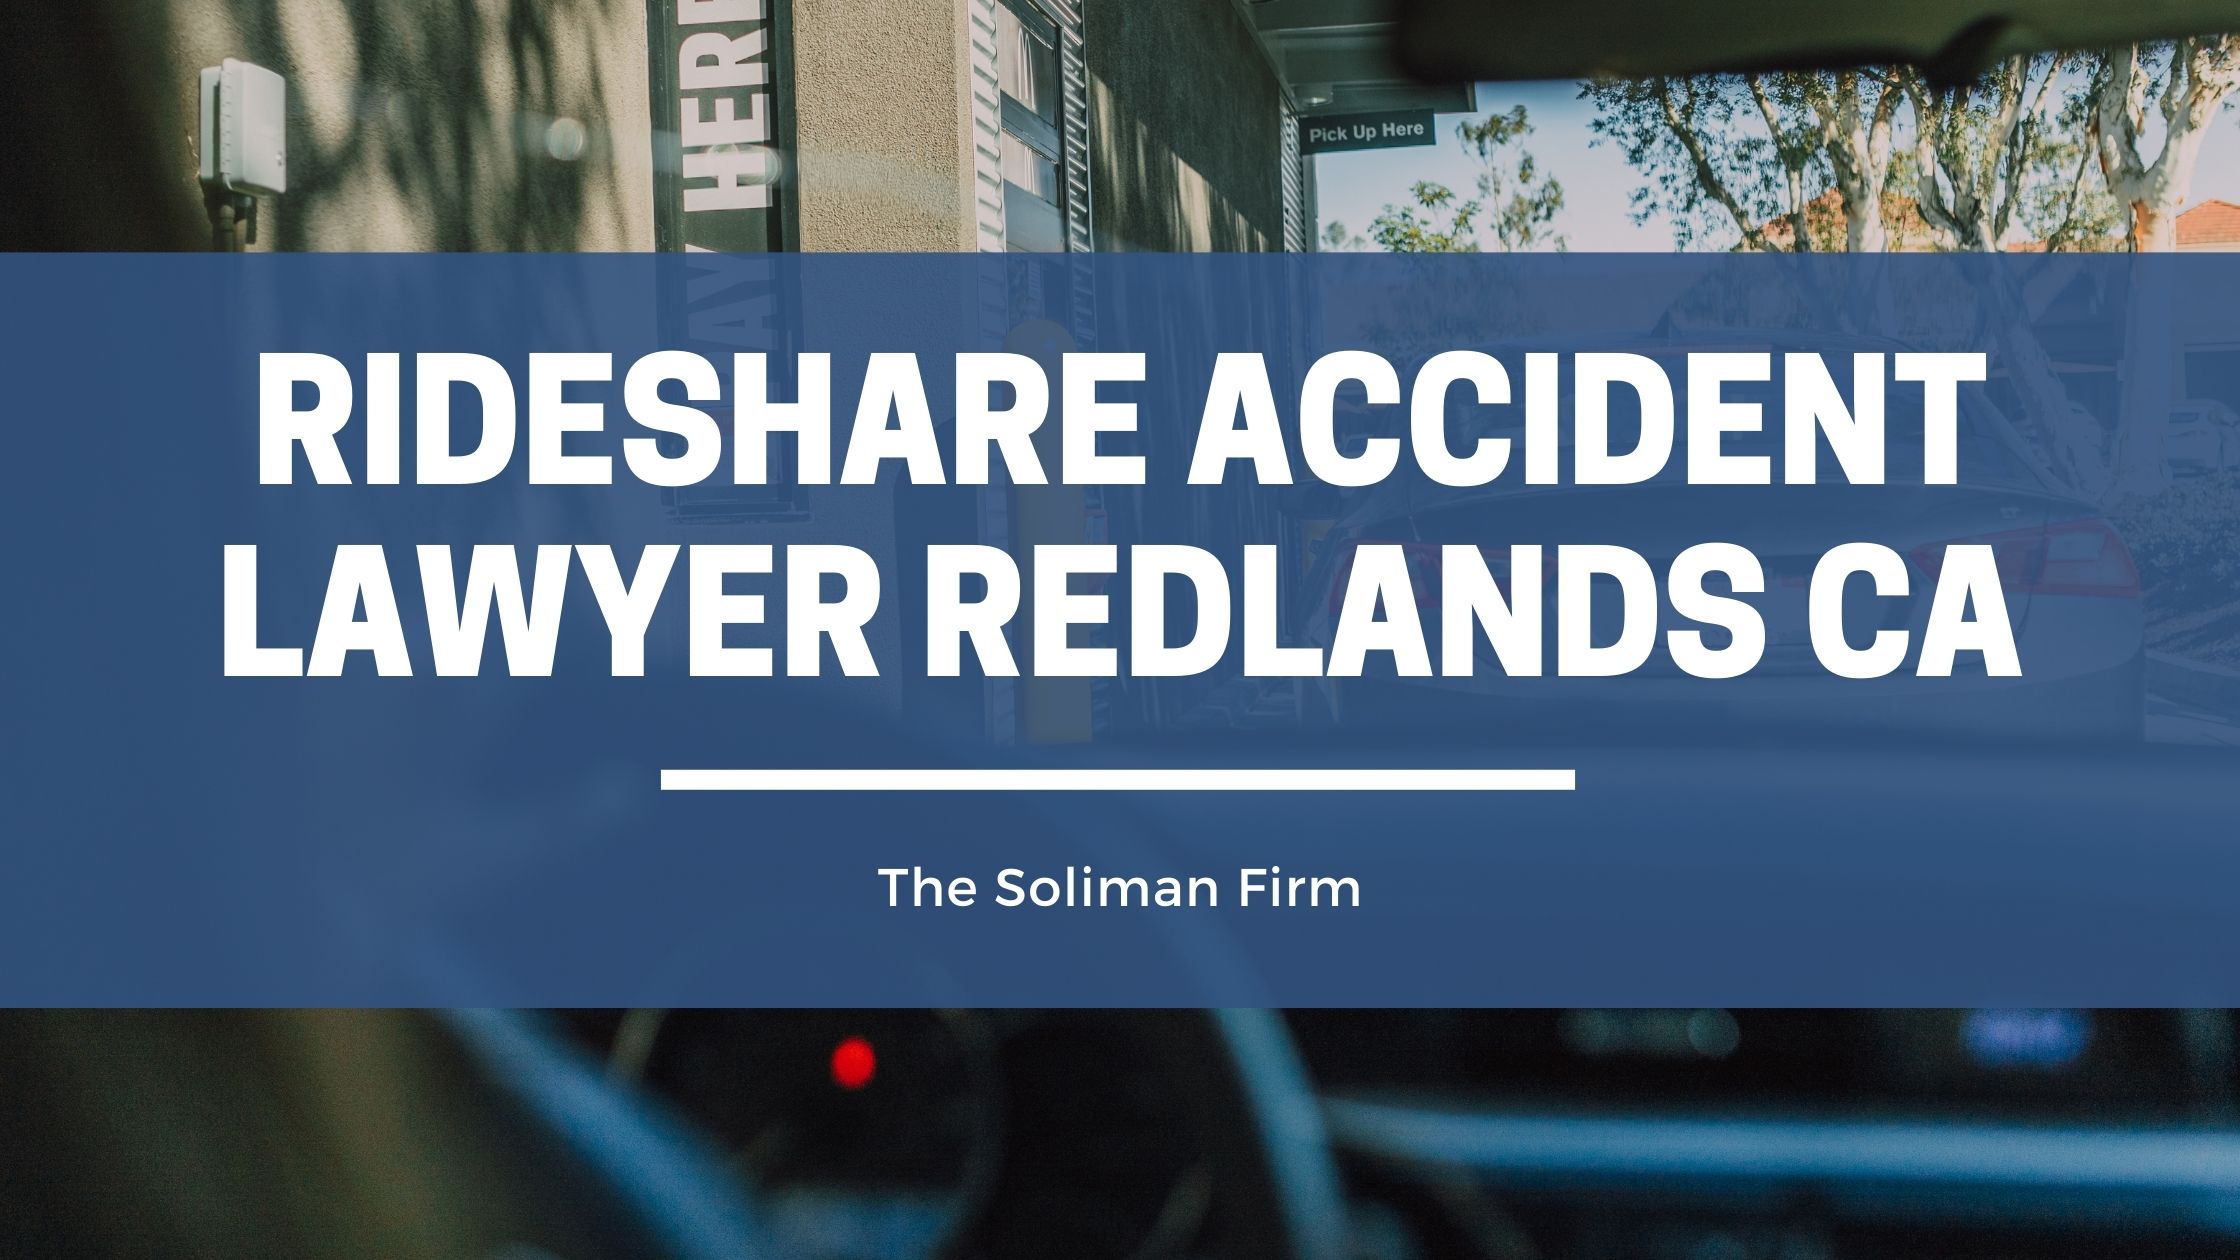 RideShare Accident Lawyer Redlands CA